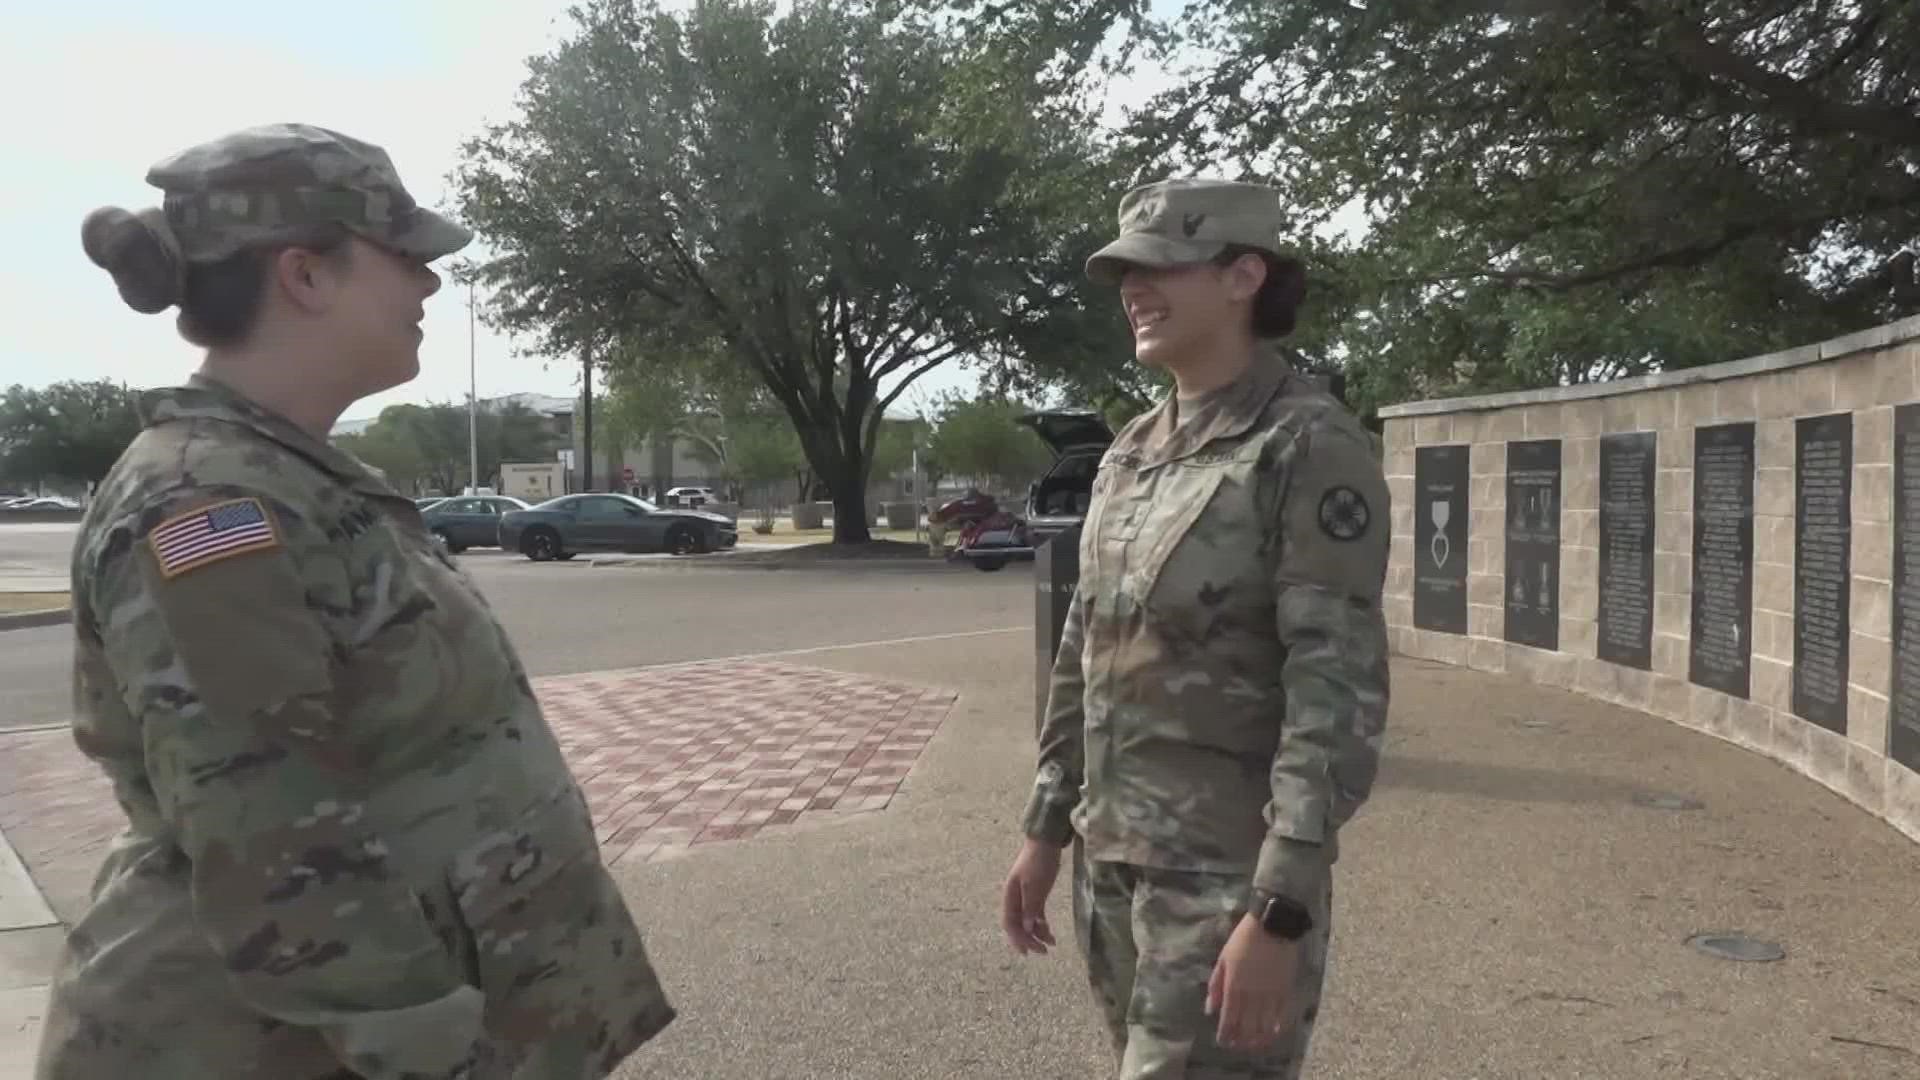 Balancing duty to your country with duty to your family, Texas Today takes a look at what motherhood in the military looks like and changes the U.S. Army has made.